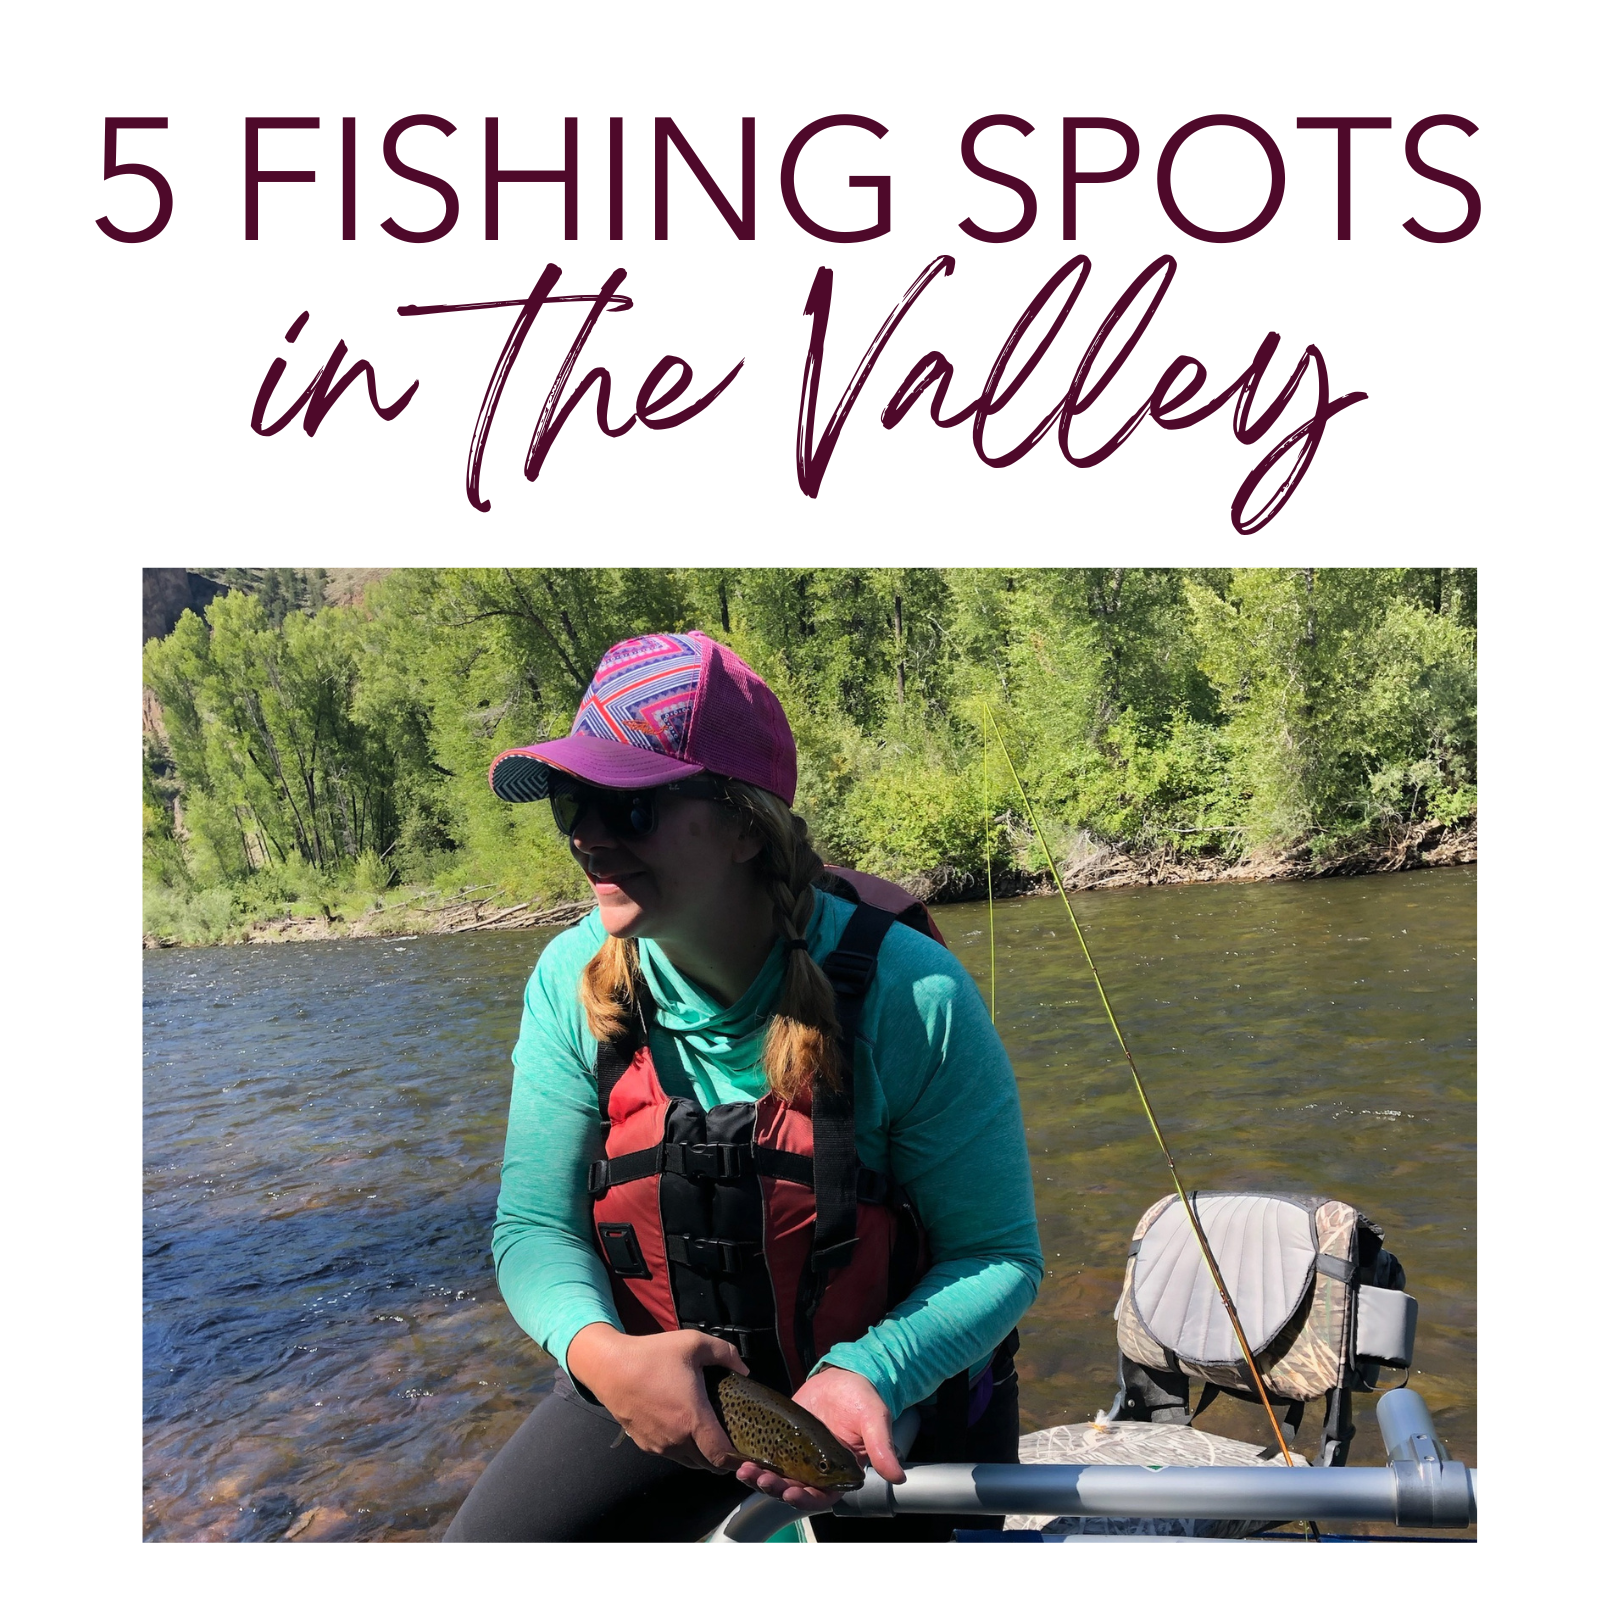 5 Fishing Spots in the Valley